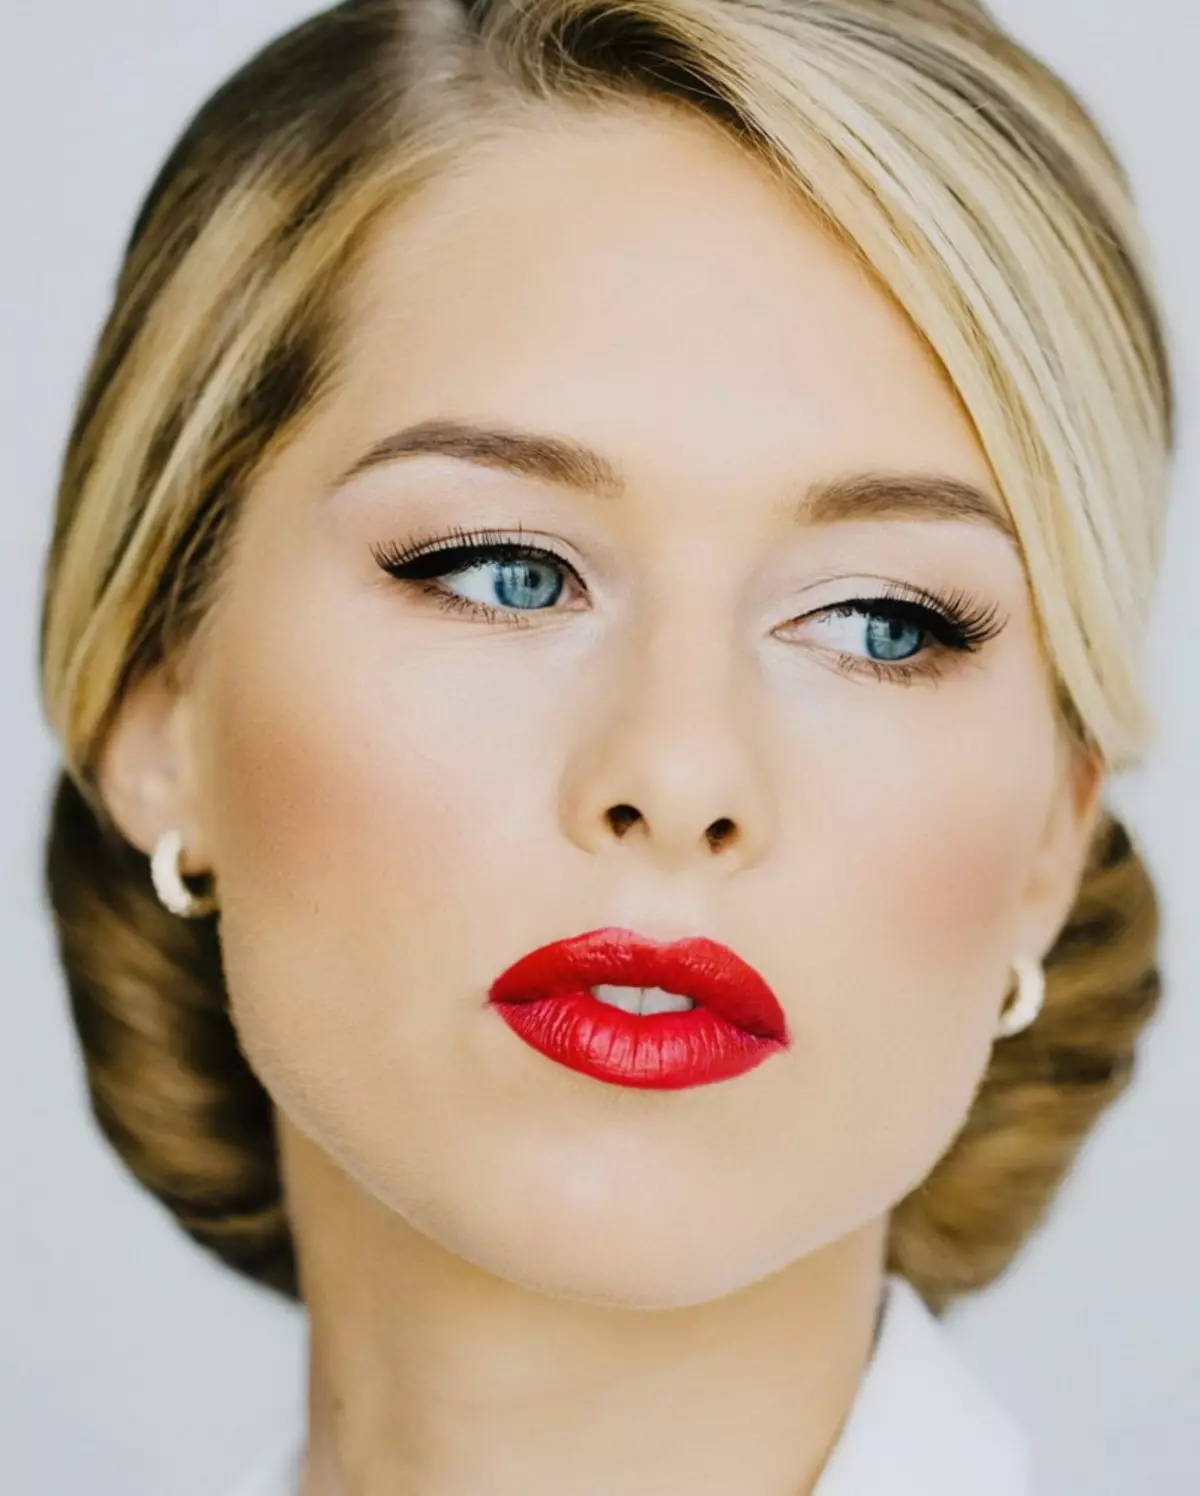 Makeup for blondes (81 photos): with blue eyes and gray, green and karium. Daytime beautiful makeup for light skin and evening with red lips, other ideas 16101_72